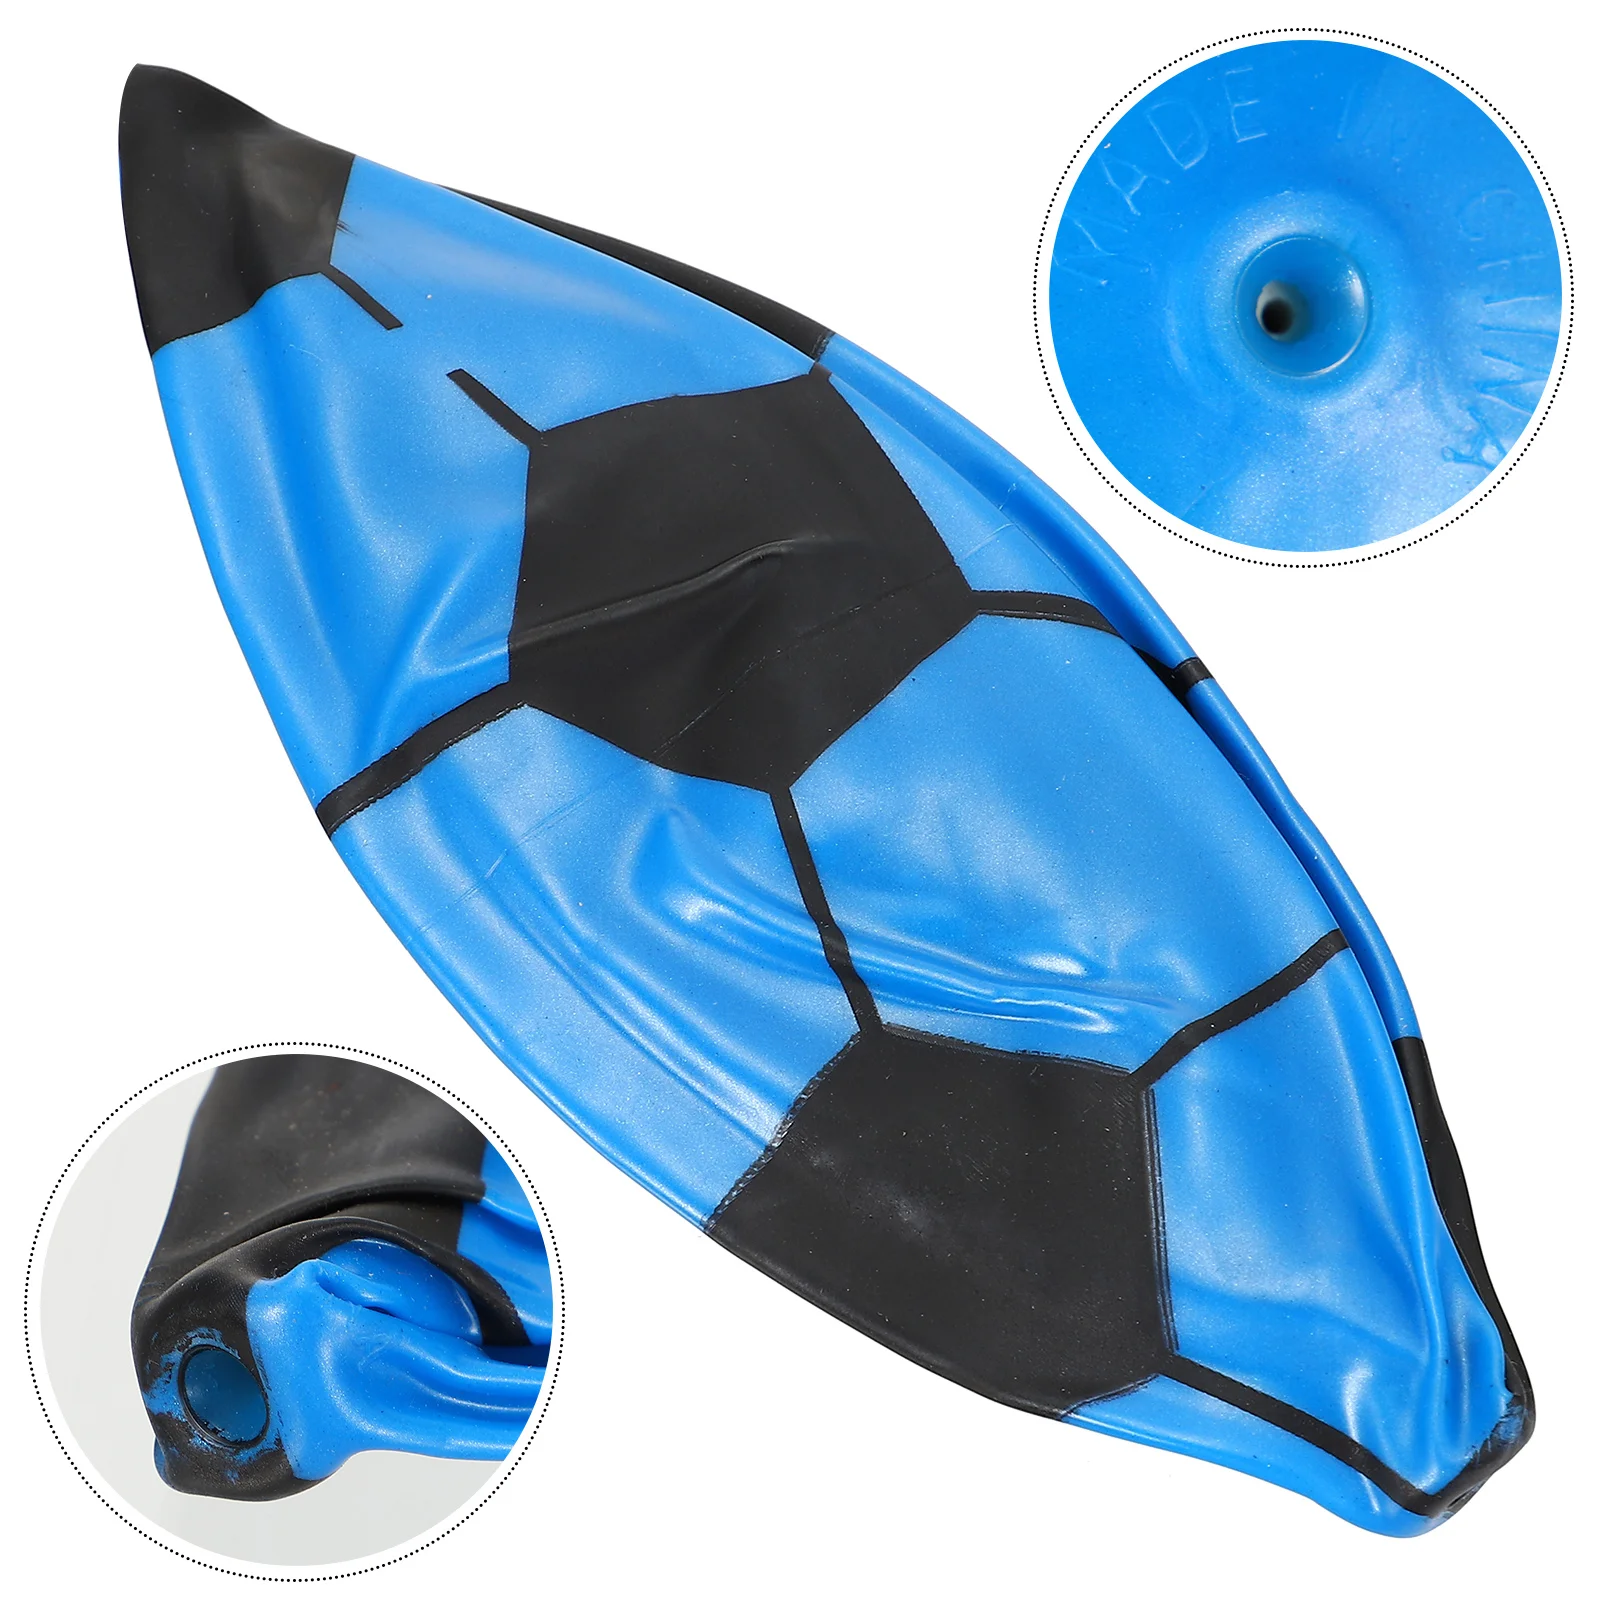 20cm Inflatable Soccer Ball Toy Football Water Balloon Swimming Pool Outdo - $16.90